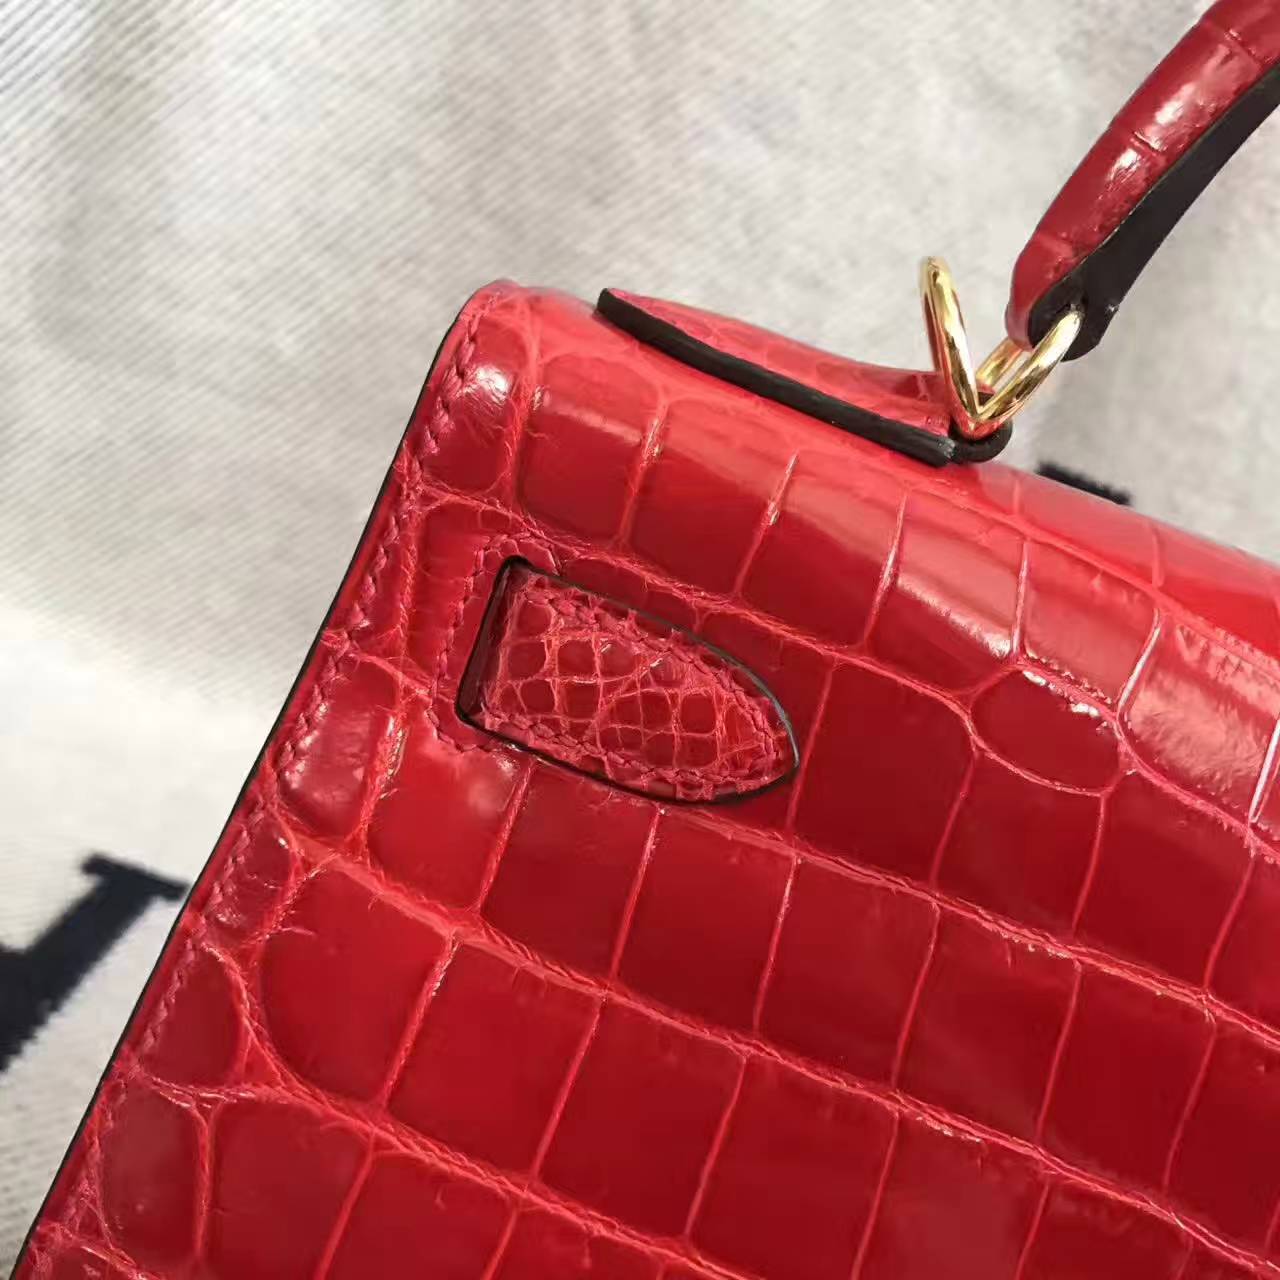 Hand Stitching Hermes Crocodile Shiny Leather Kelly 28cm in CK95 Braise